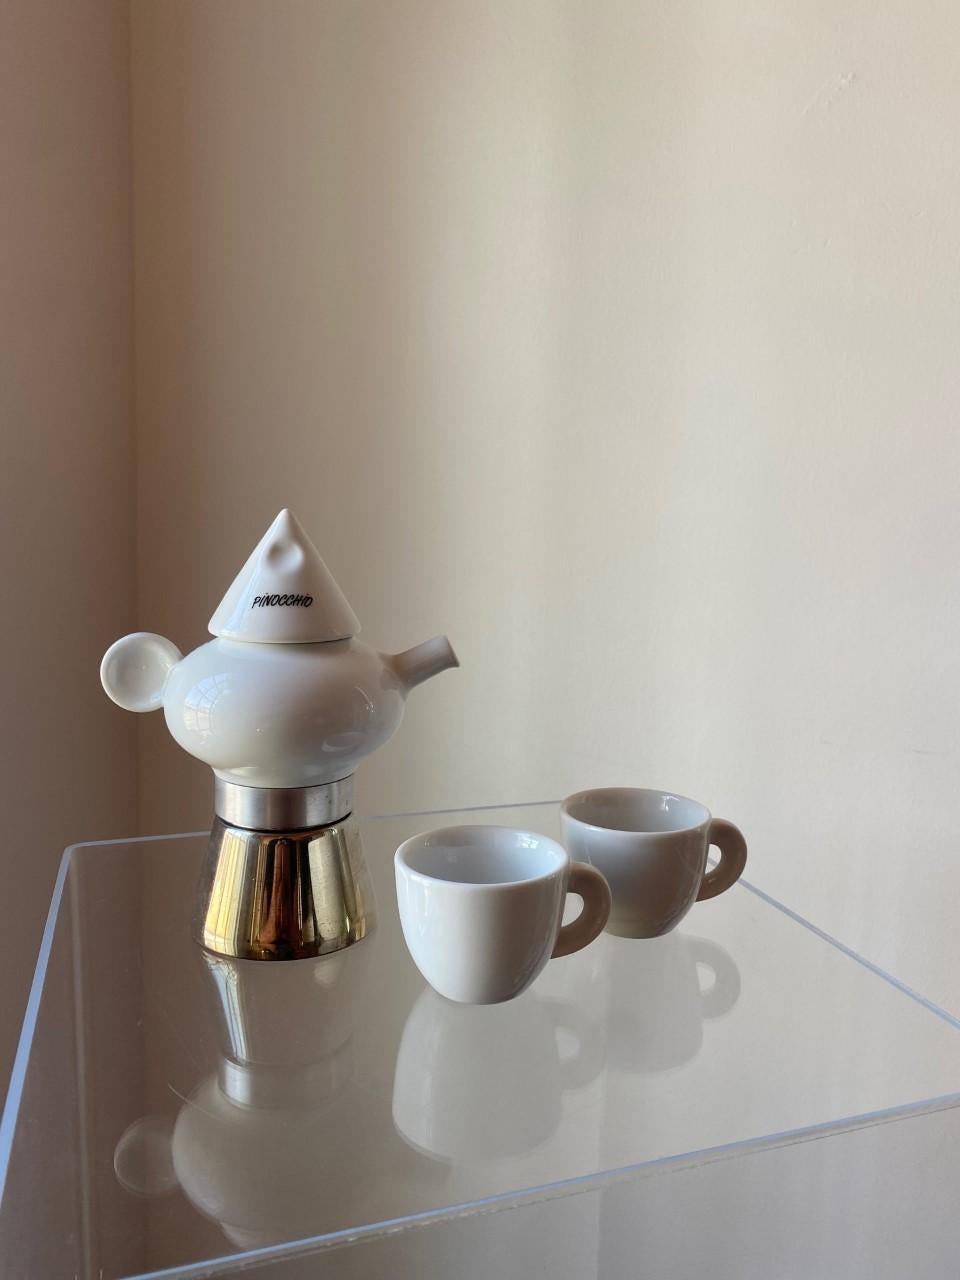 Great design on this stovetop polished steel and ceramic espresso maker, with two single cups for Espresso, circa 1990's great condition. This model is whimsical and unique. Styled after pinocchio, the piece has one ear handle with lid, styled after